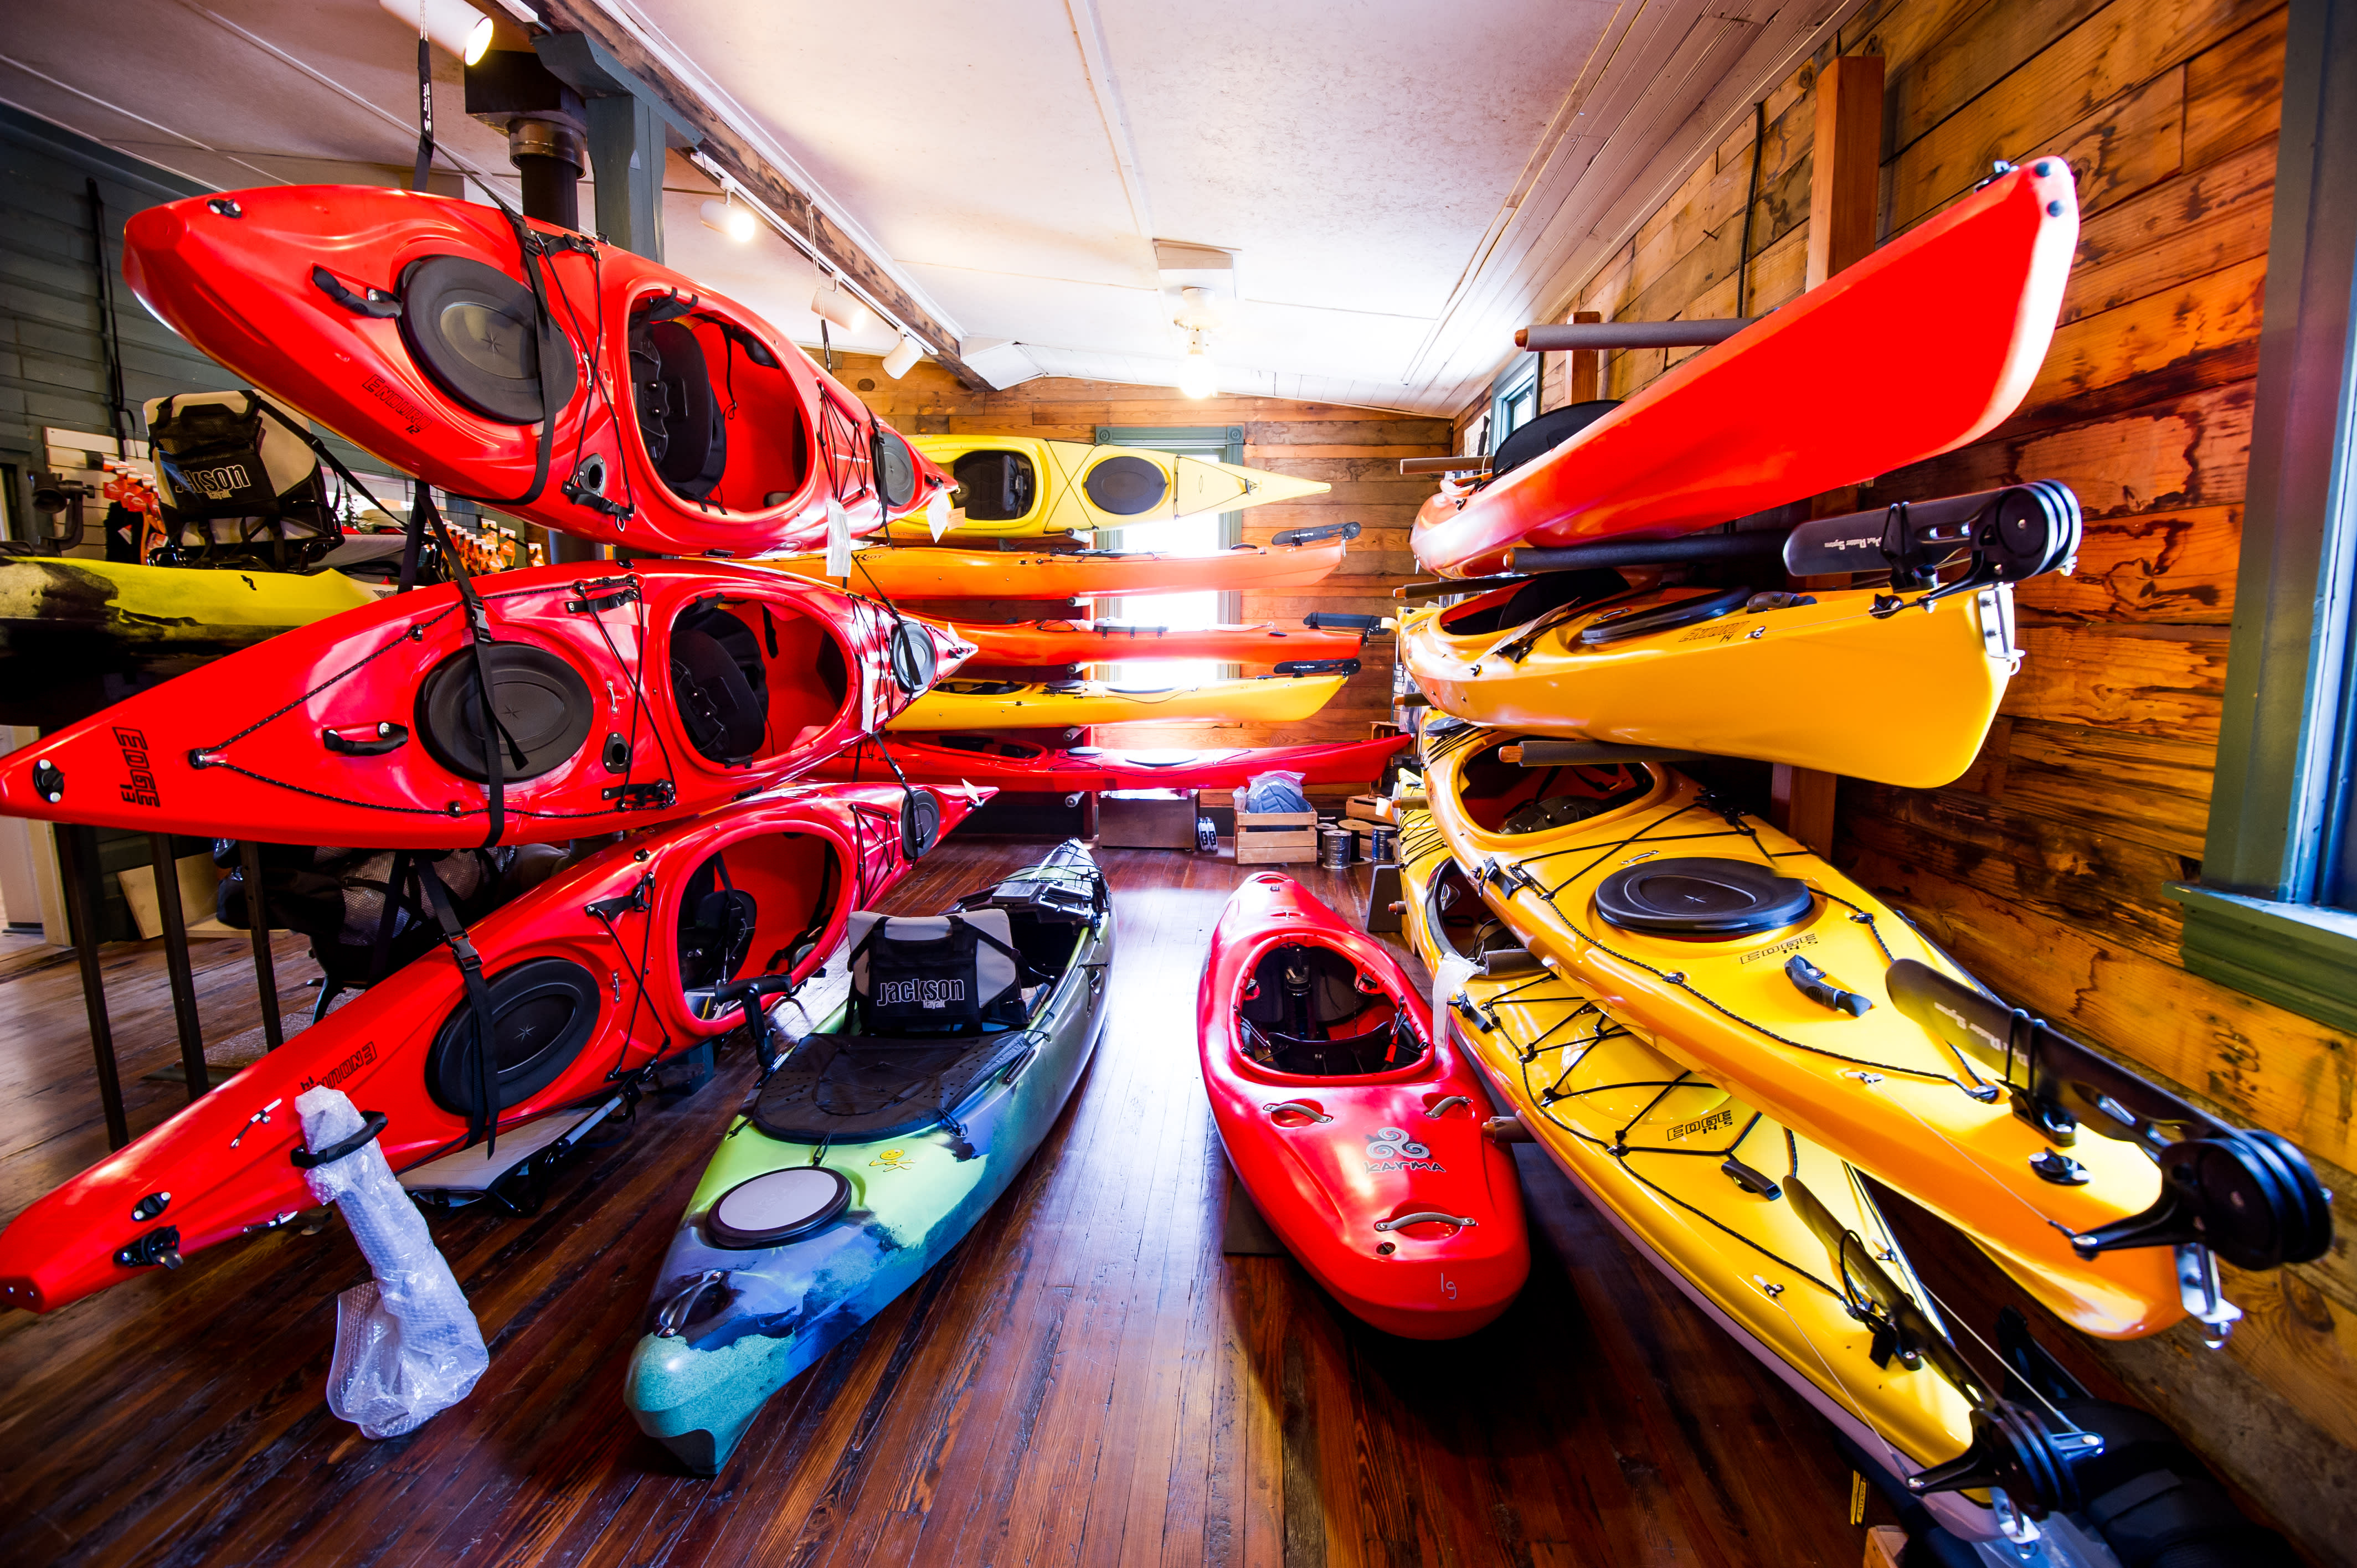 Looking for a new kayak? Don't miss Demo Weekend at Shank's Mare Outfitters.